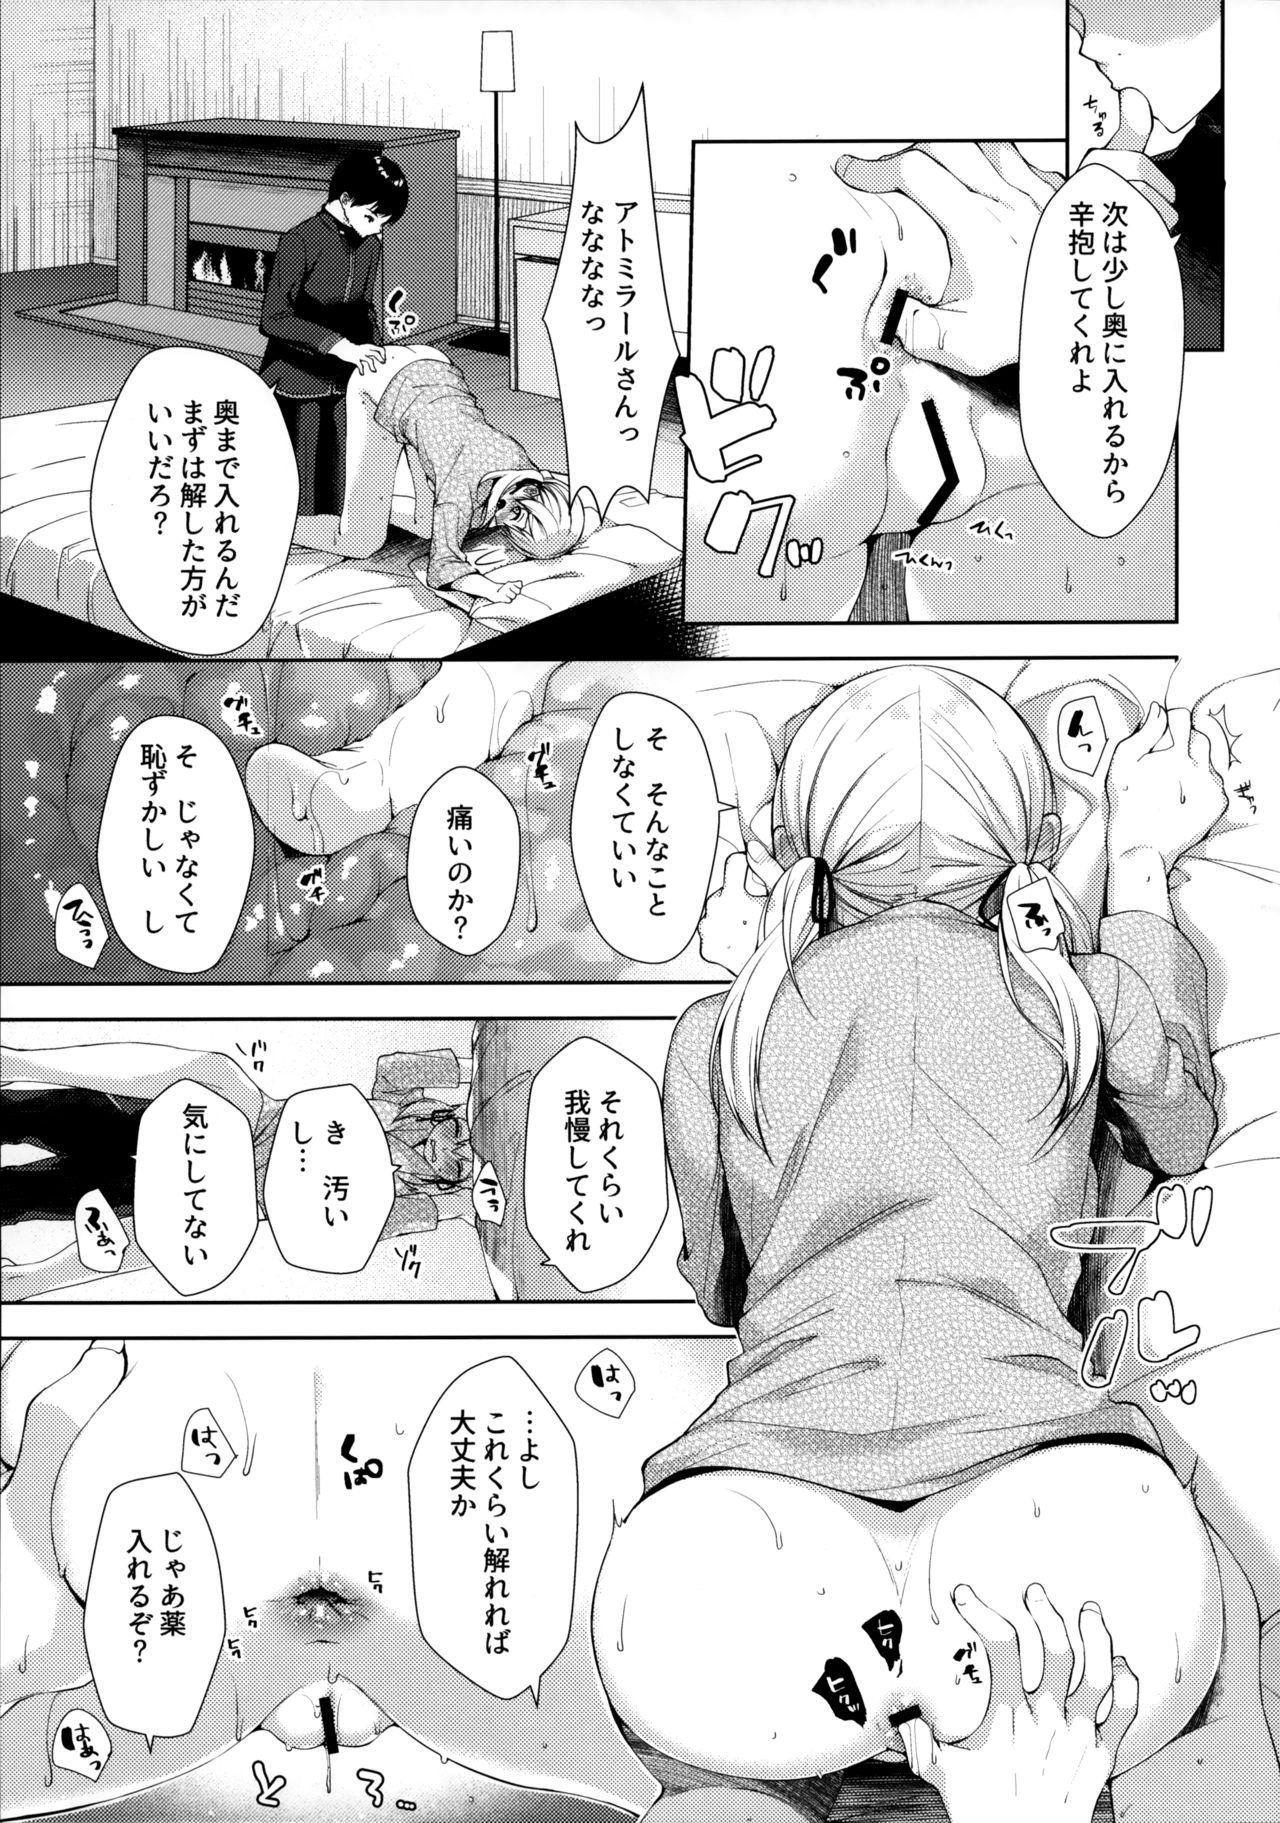 Swinger +1°C - Kantai collection Buttfucking - Page 7